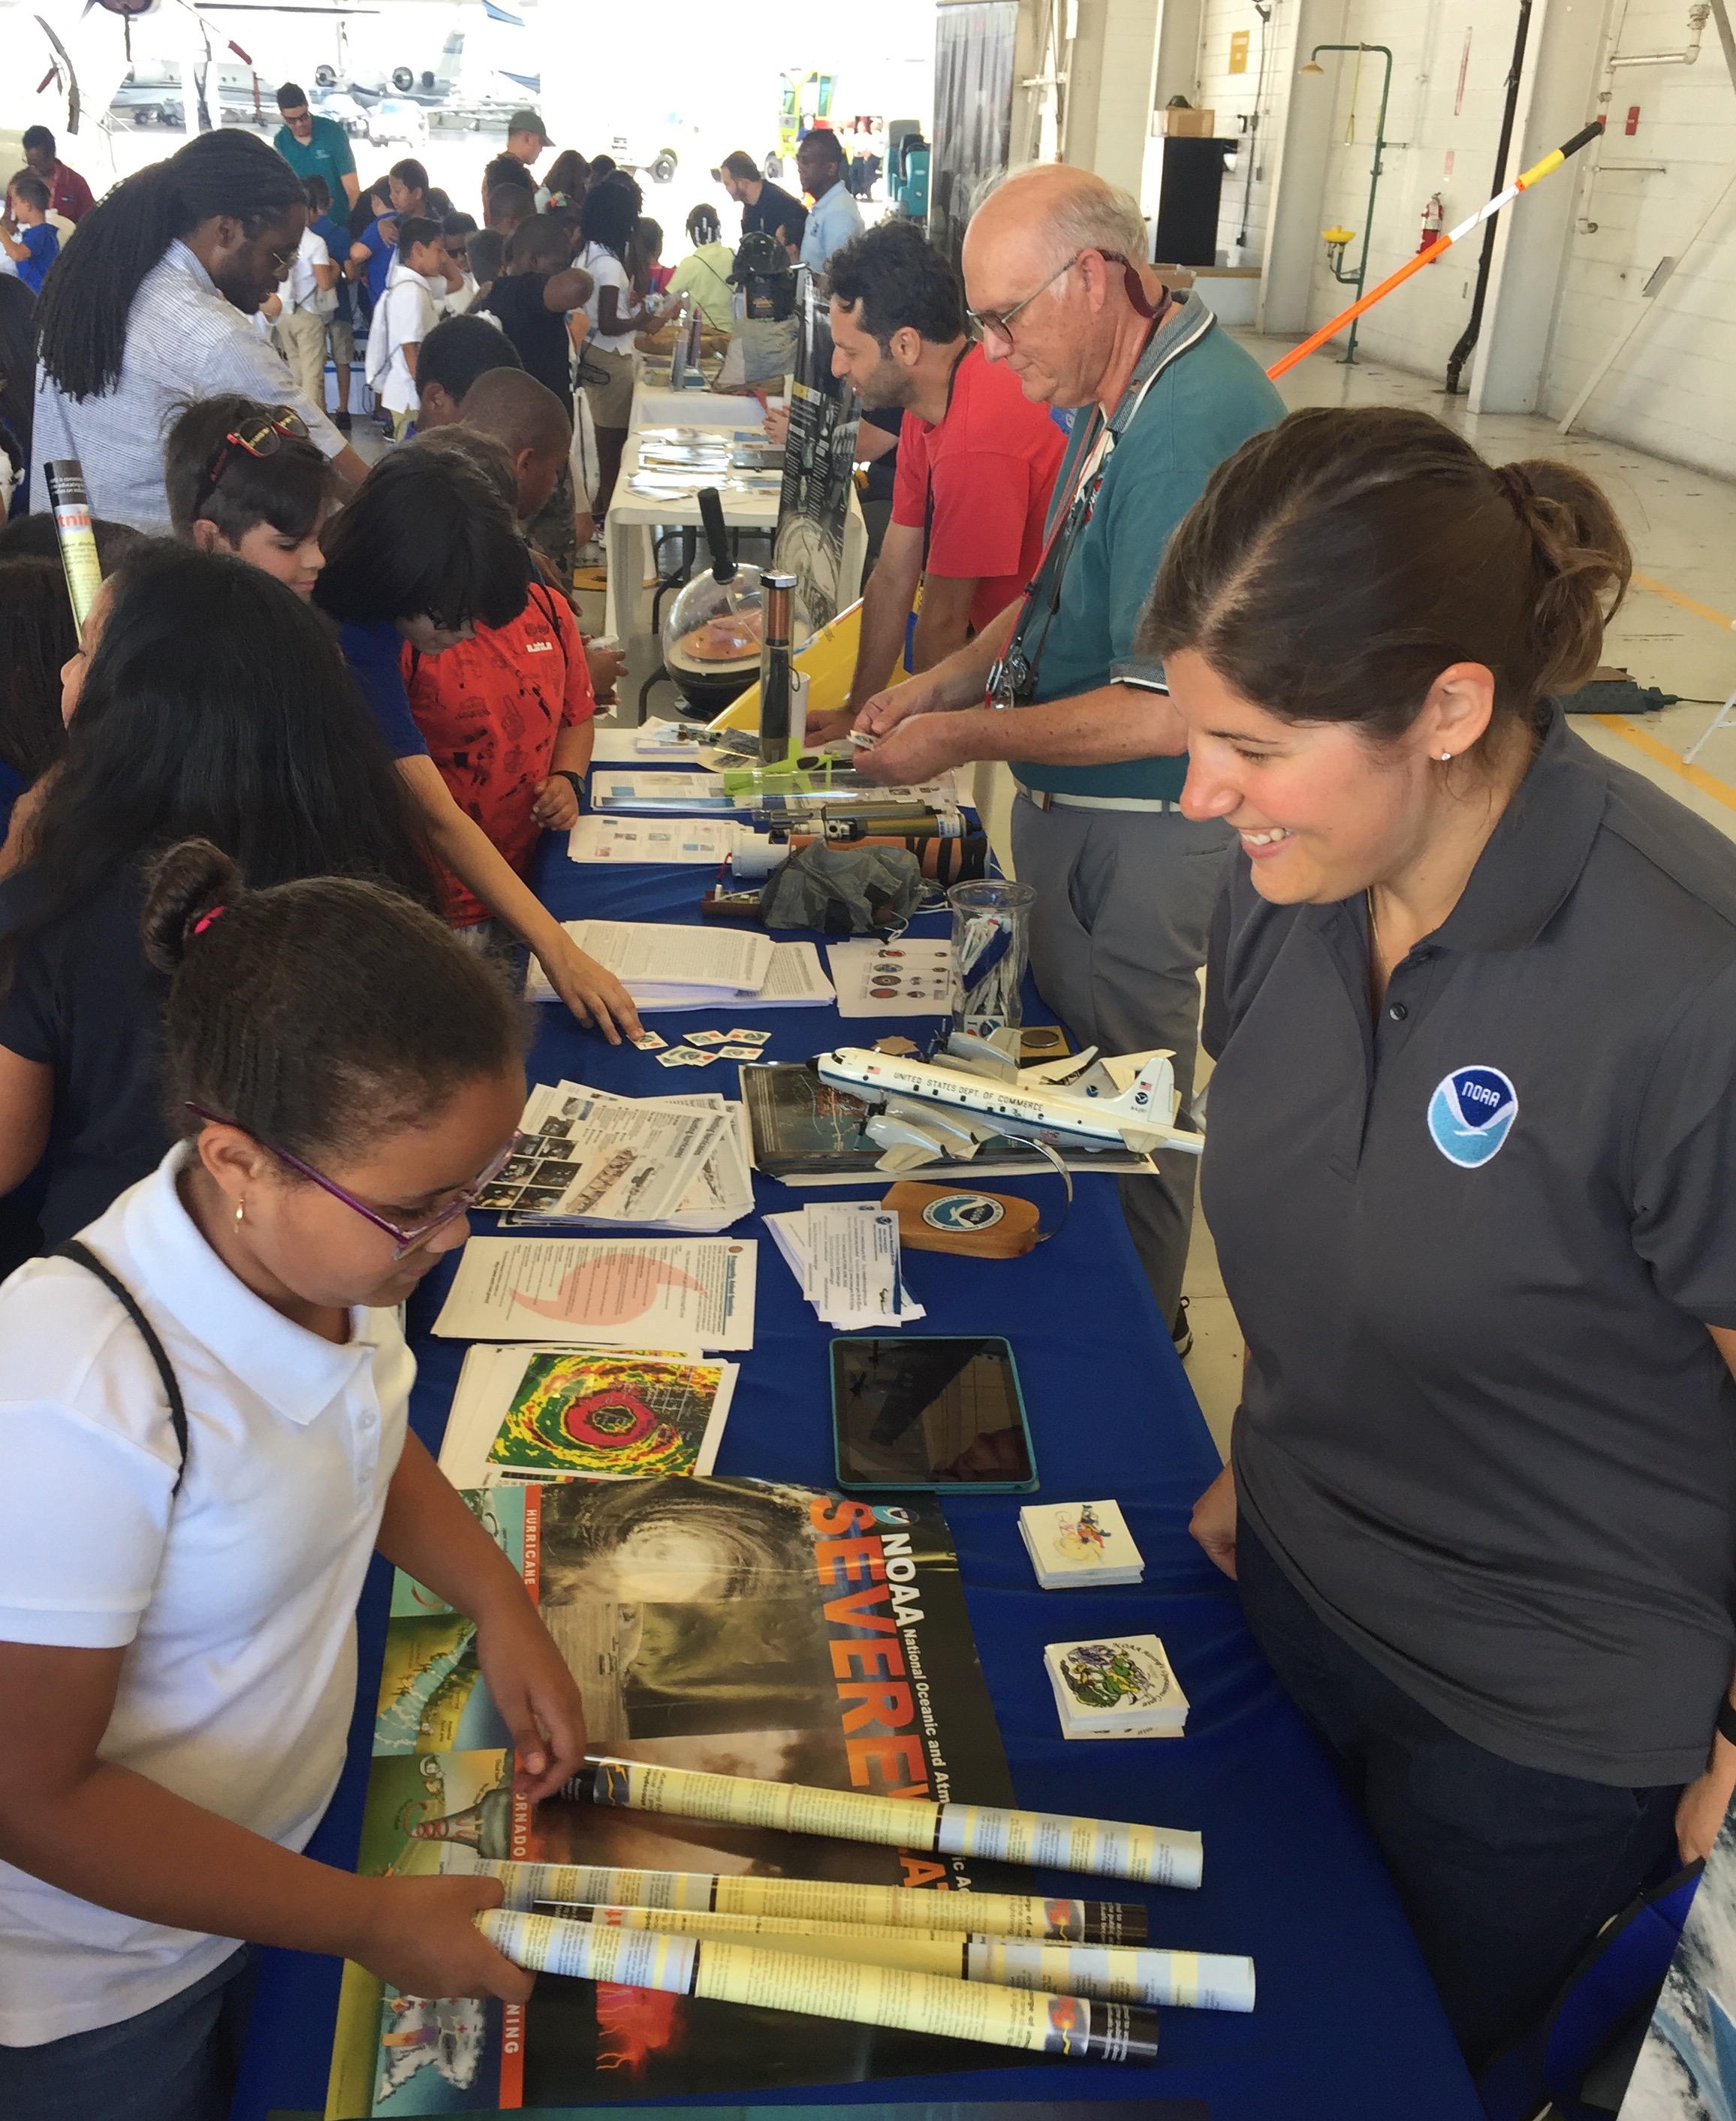 AOML Scientists teaching visitors about hurricane data collection. Image credit: NOAA